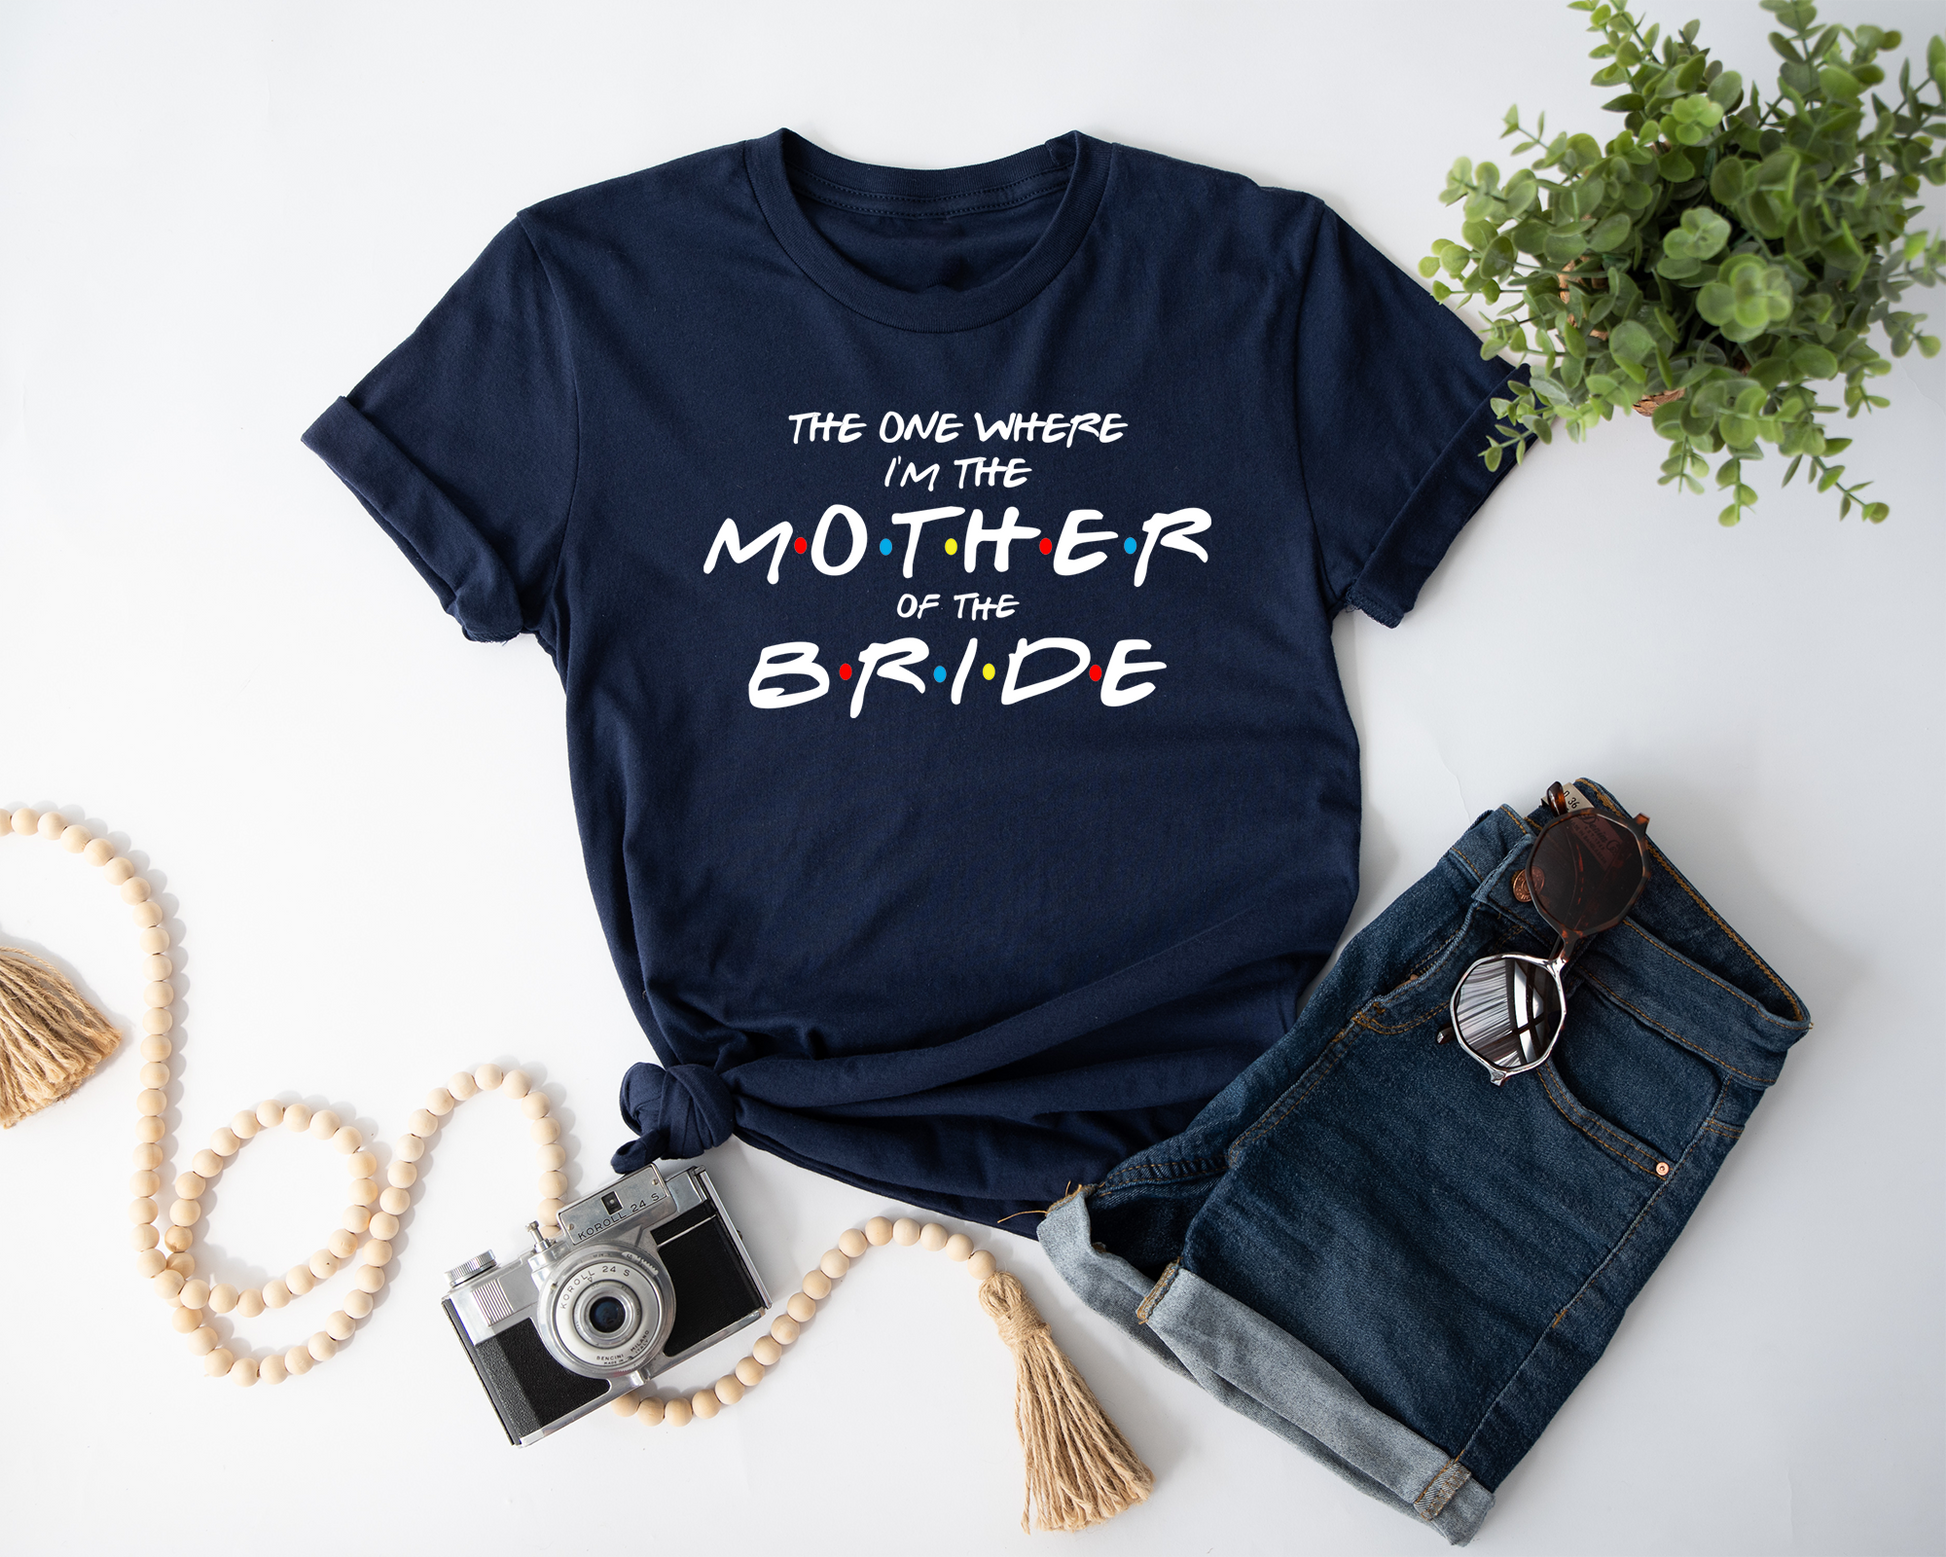 271d2fcc-2e13-42ae-b48f-67c176f24561/mother_of_the_bride_white-NavyL-F.png